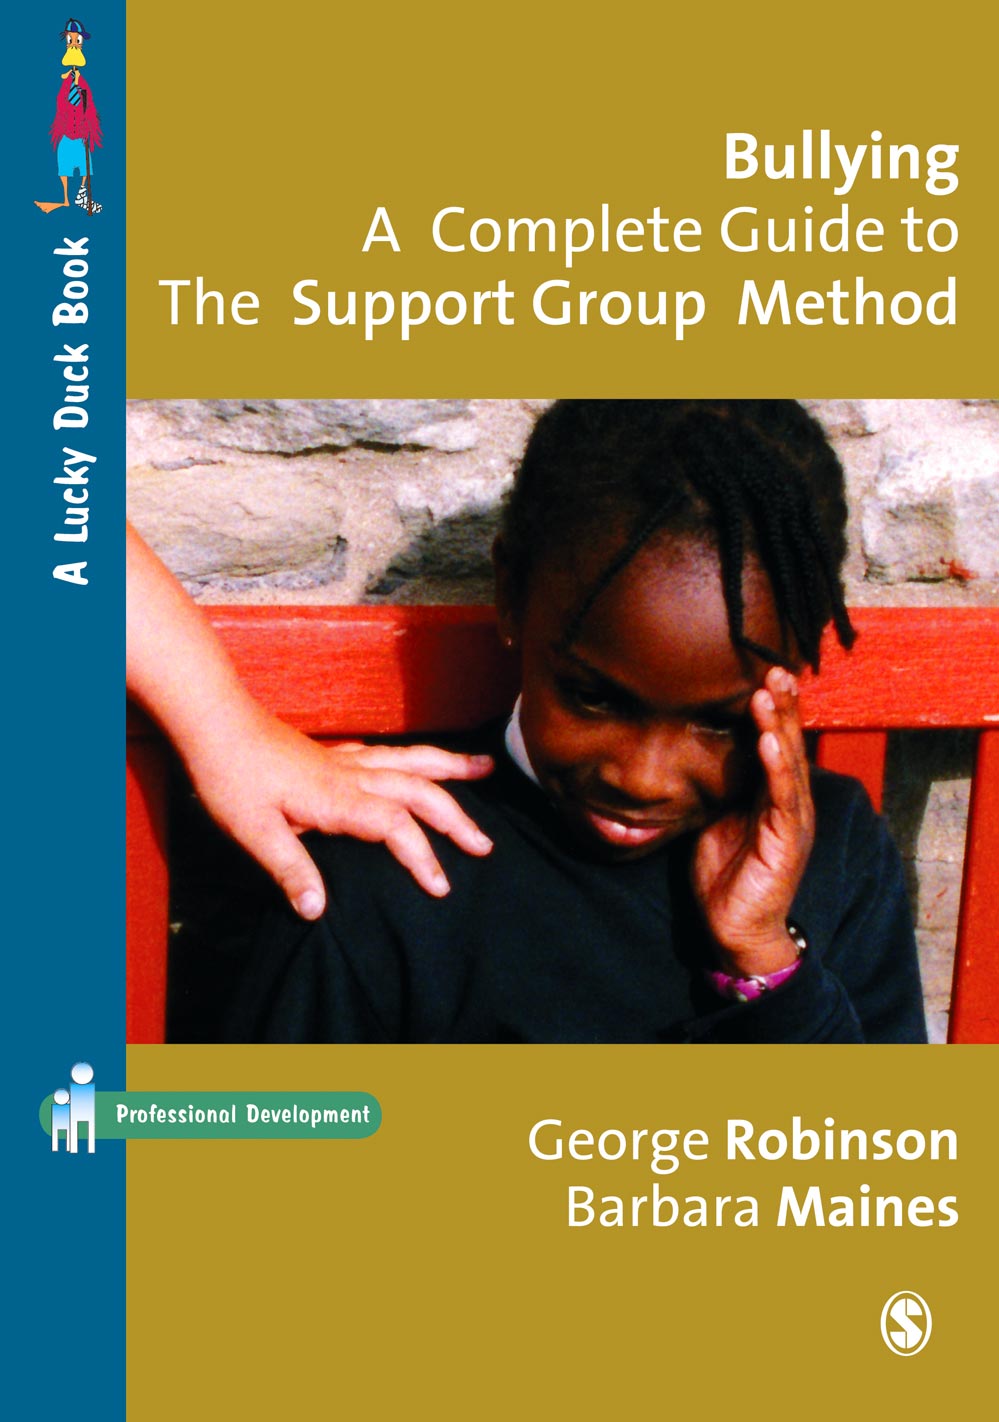 Bullying: A Complete Guide to the Support Group Method - George Robinson, Barbara Maines